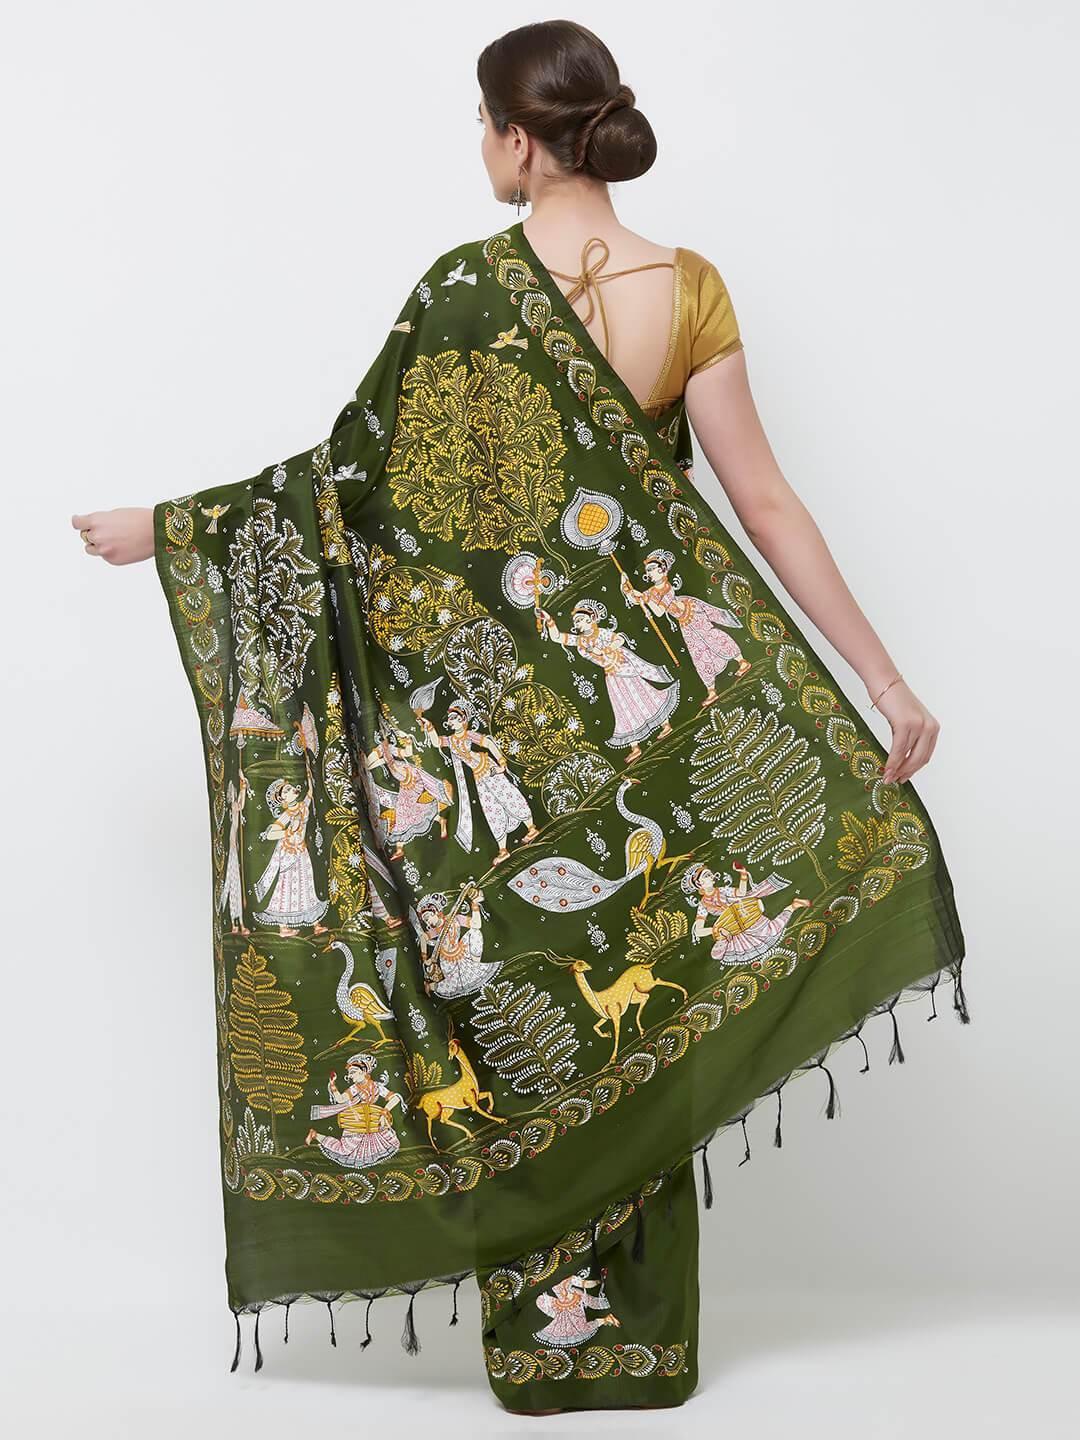 CraftsCollection.in -Green Pure Silk Saree with handpainted Pattachitra motifs